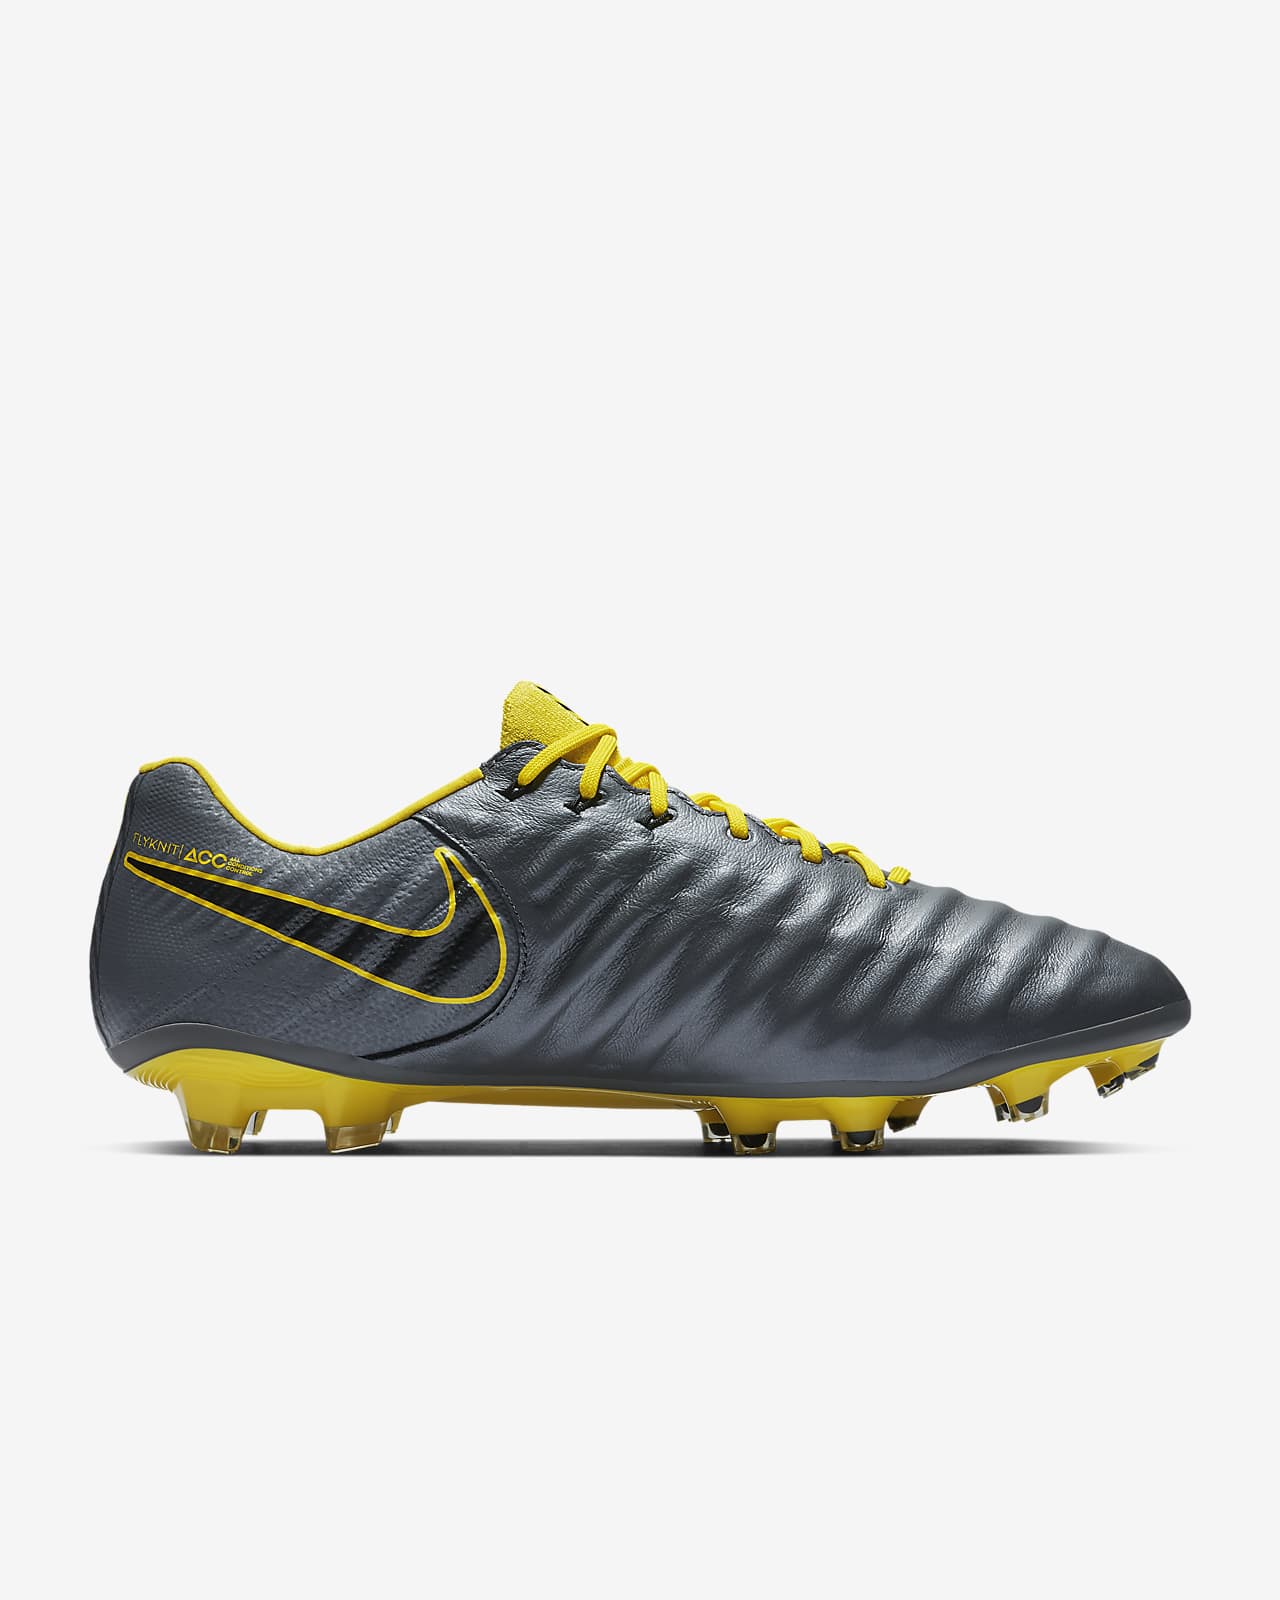 Nike Legend 7 Elite FG Game Over Firm-Ground Soccer Cleat. Nike.com